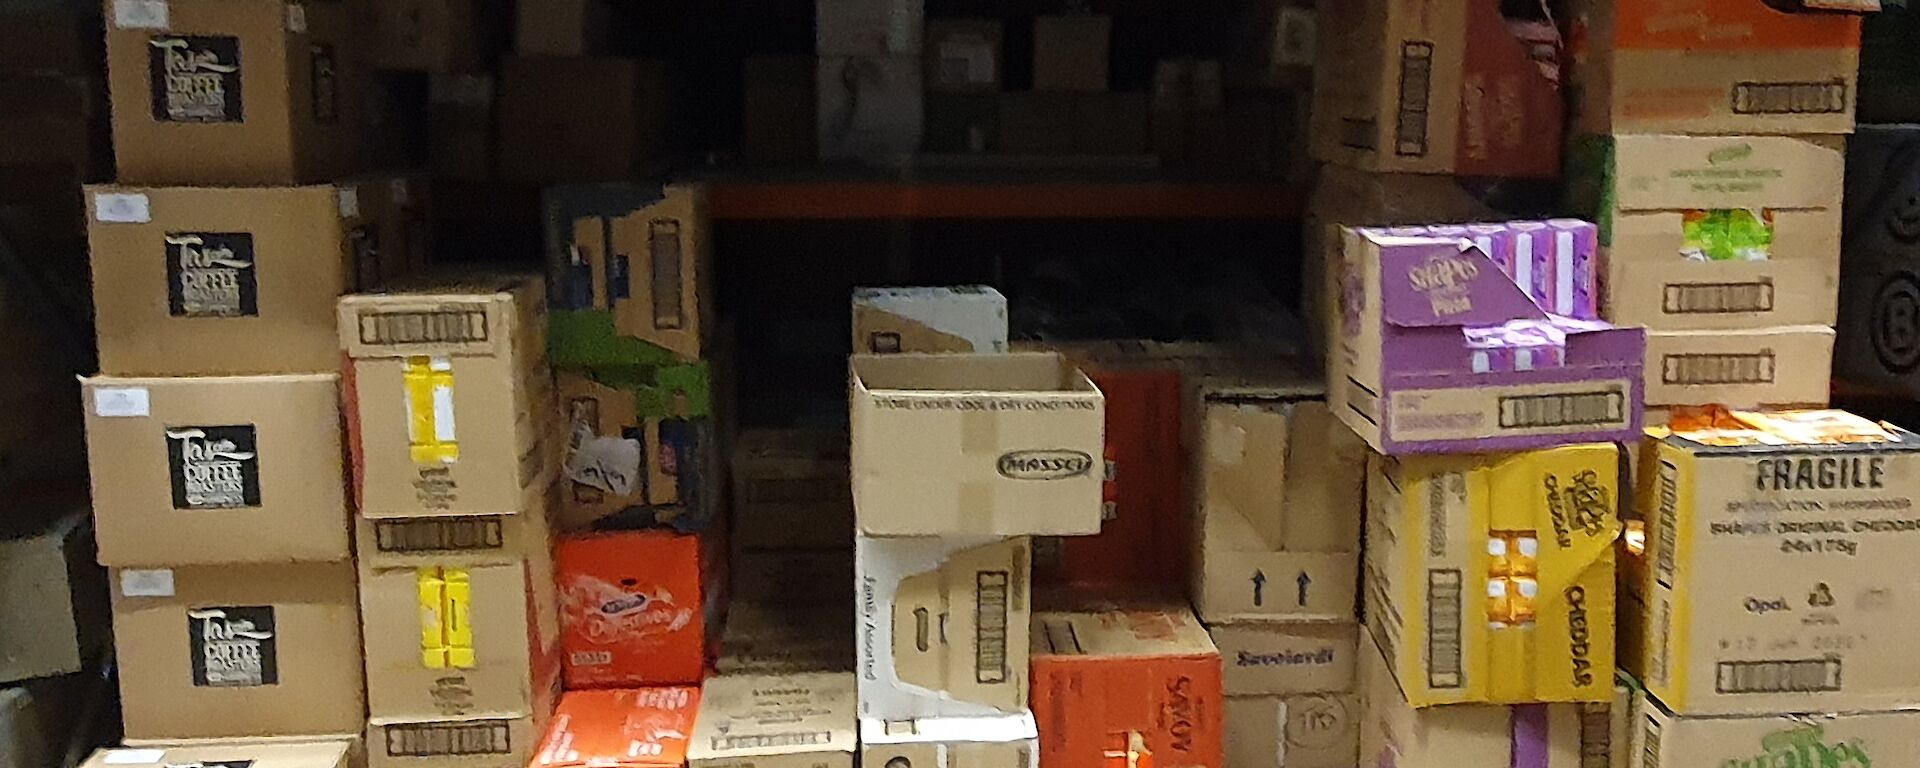 A pallet full of boxes of biscuits